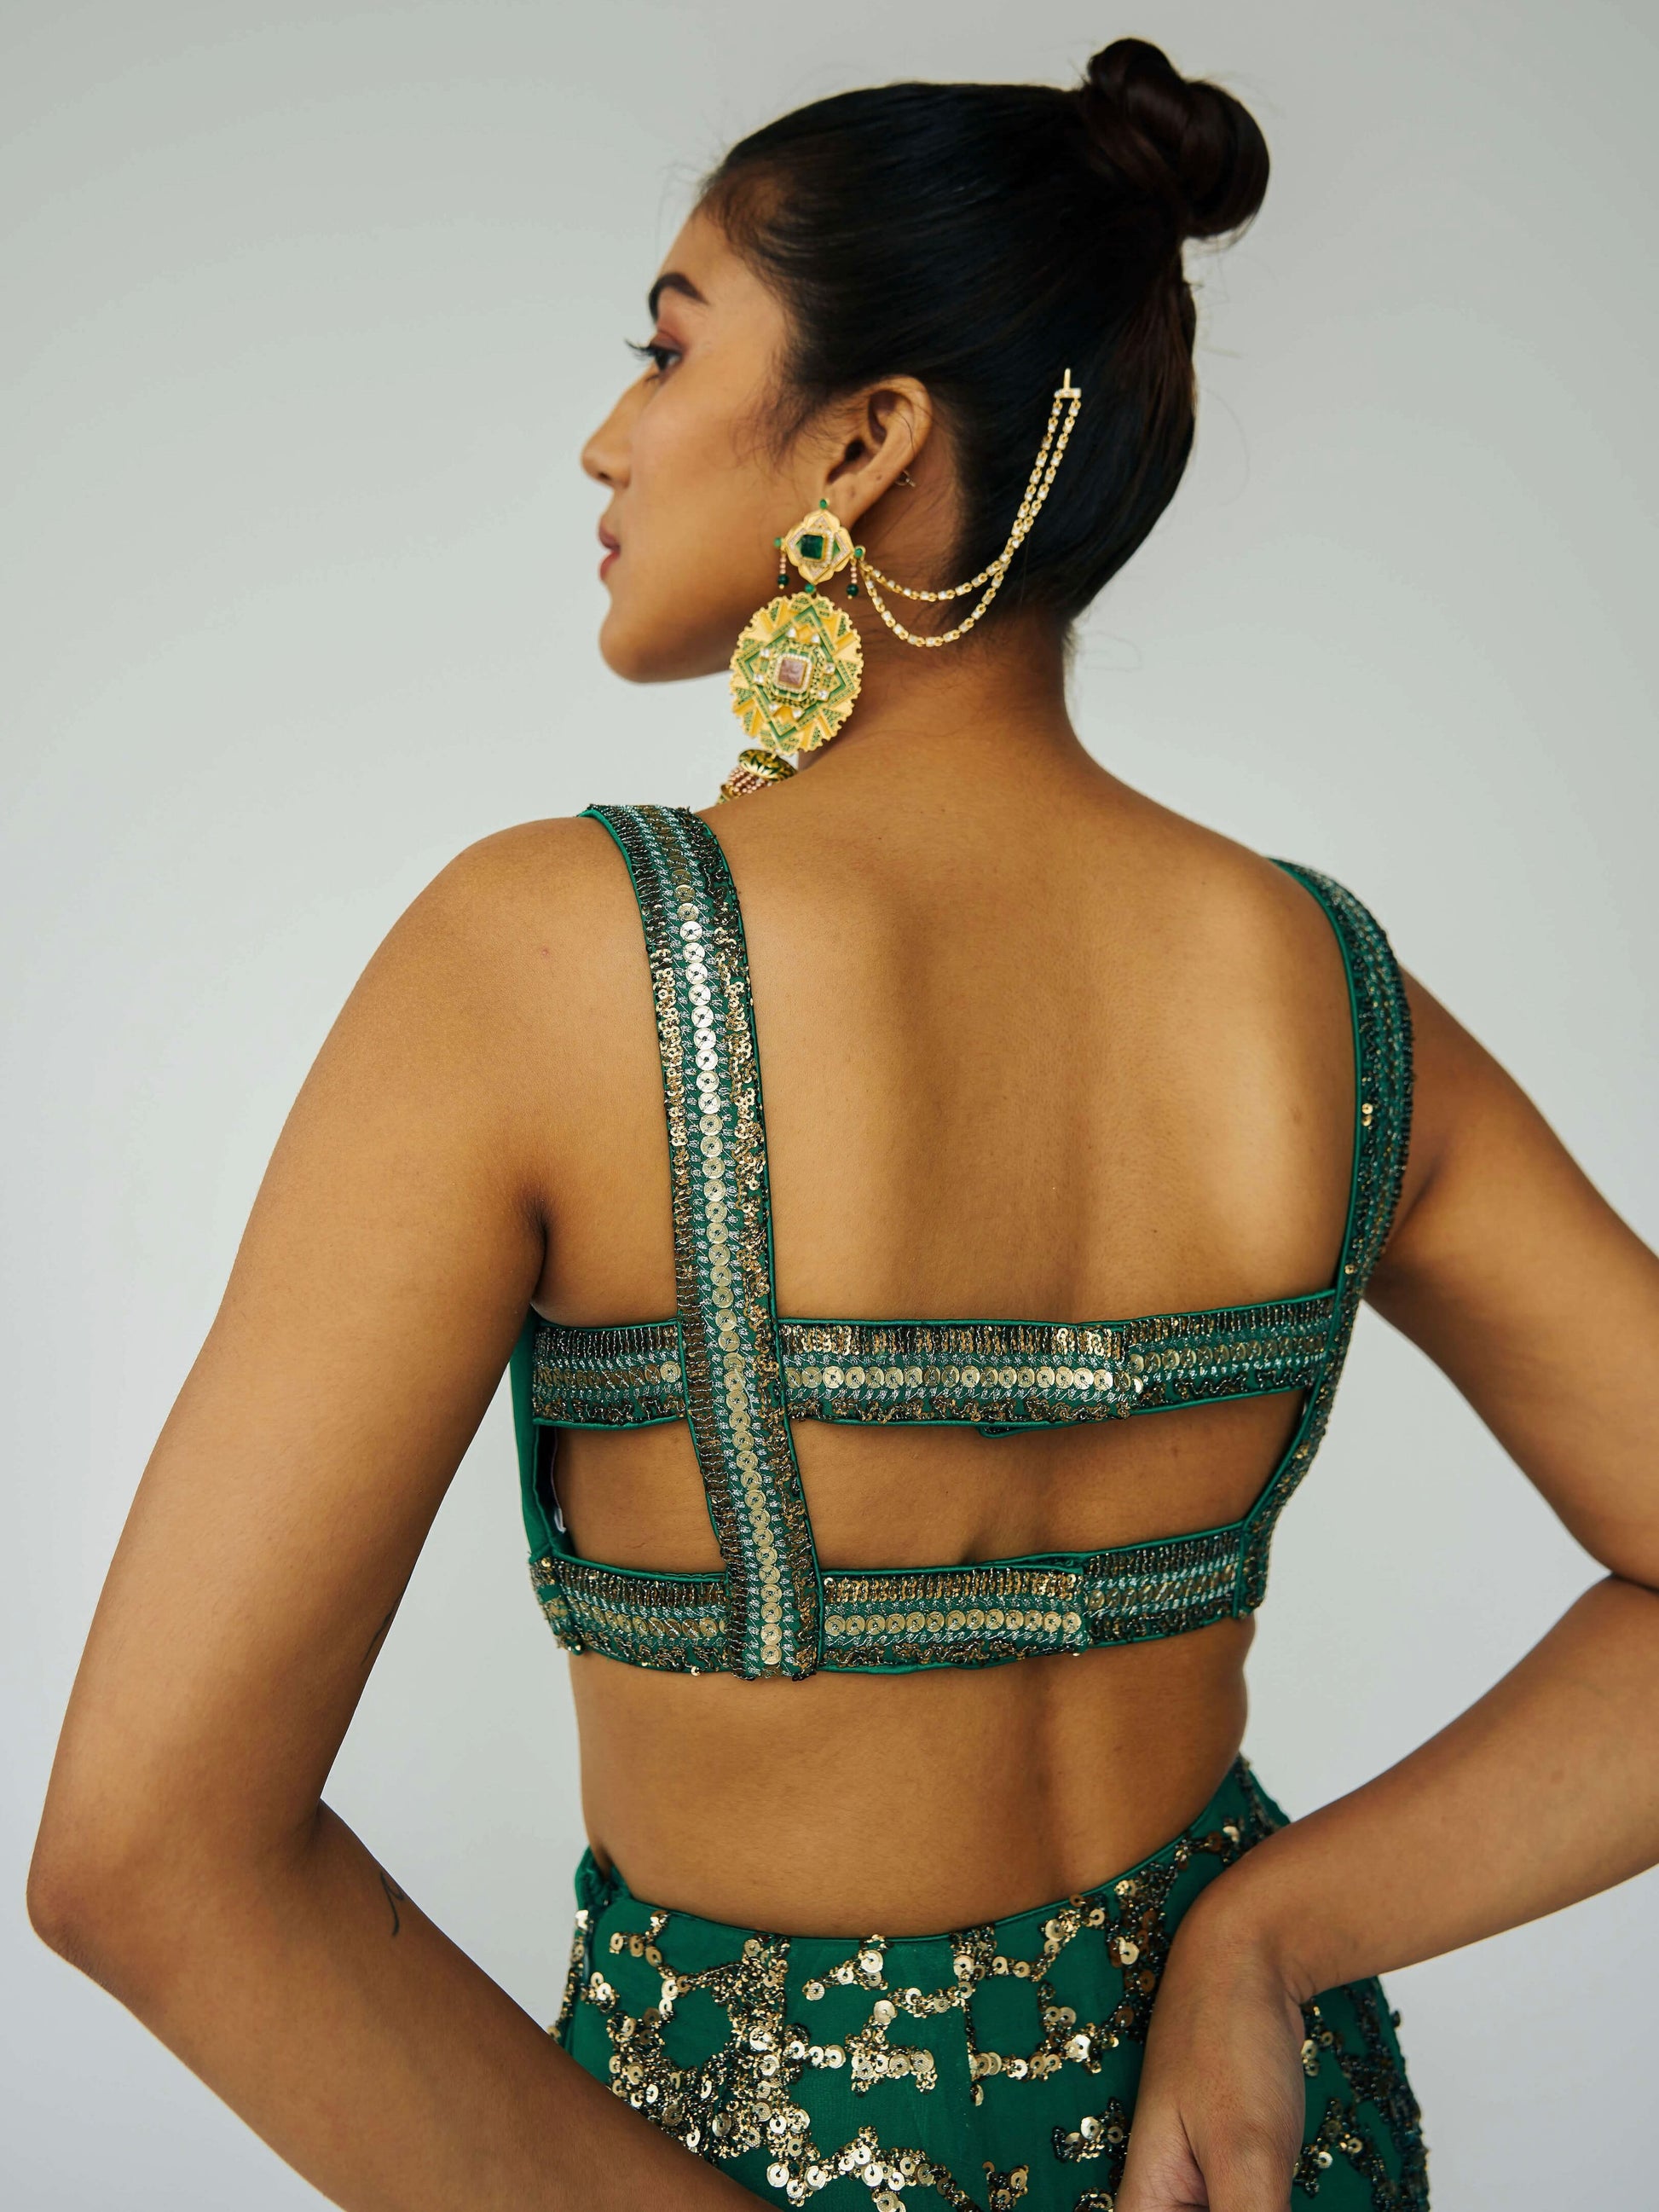 The Detachable Lehenga features a sequin-adorned skirt, criss-cross back blouse, a and delicate net dupatta. With a removable portion, it effortlessly transforms into a shorter skirt for a night of dancing.